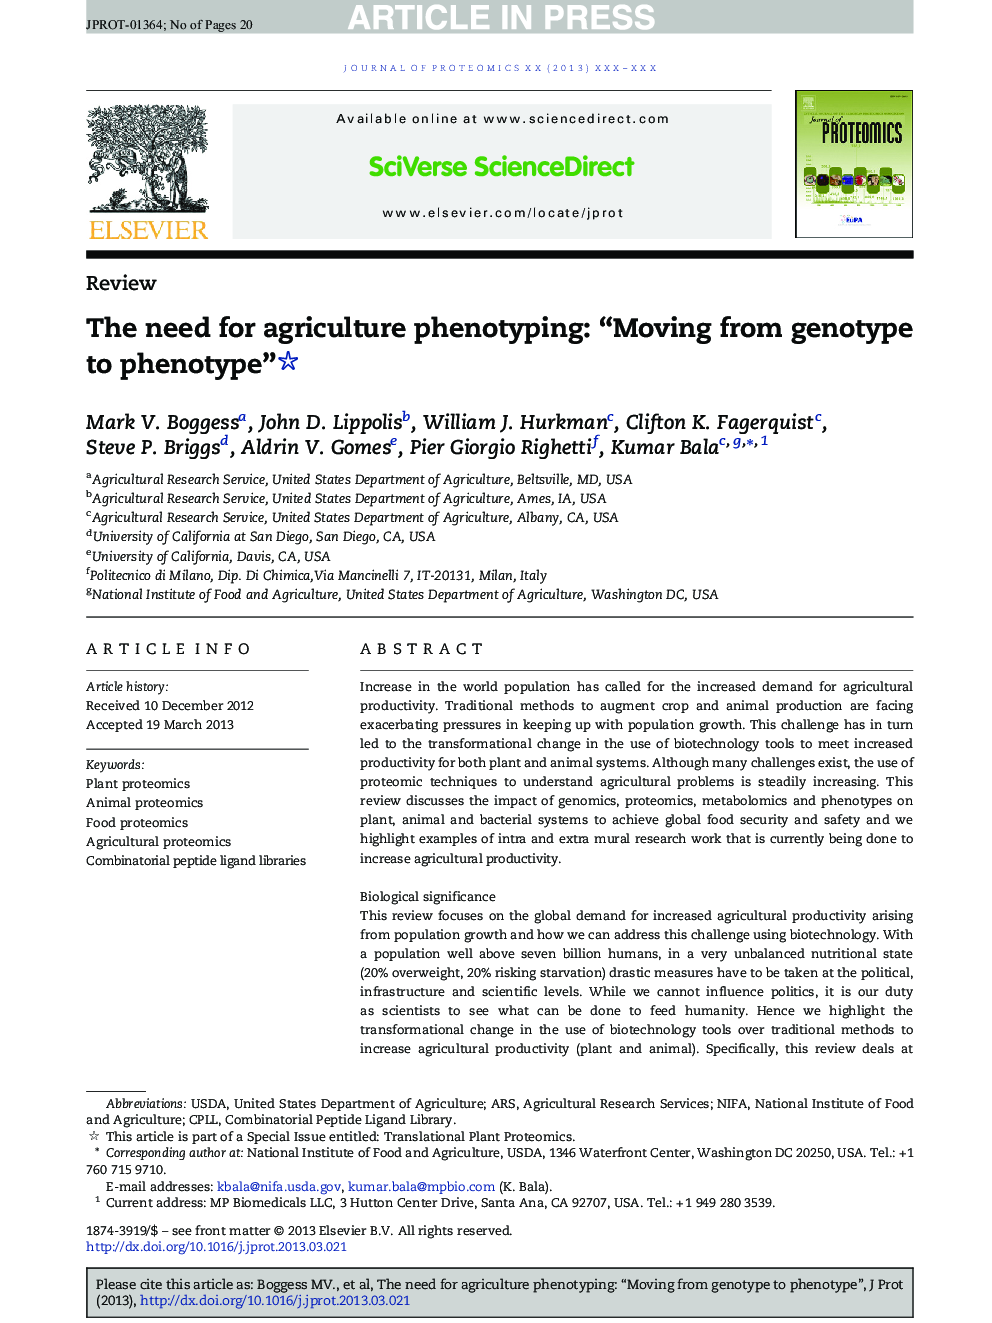 The need for agriculture phenotyping: “Moving from genotype to phenotype”